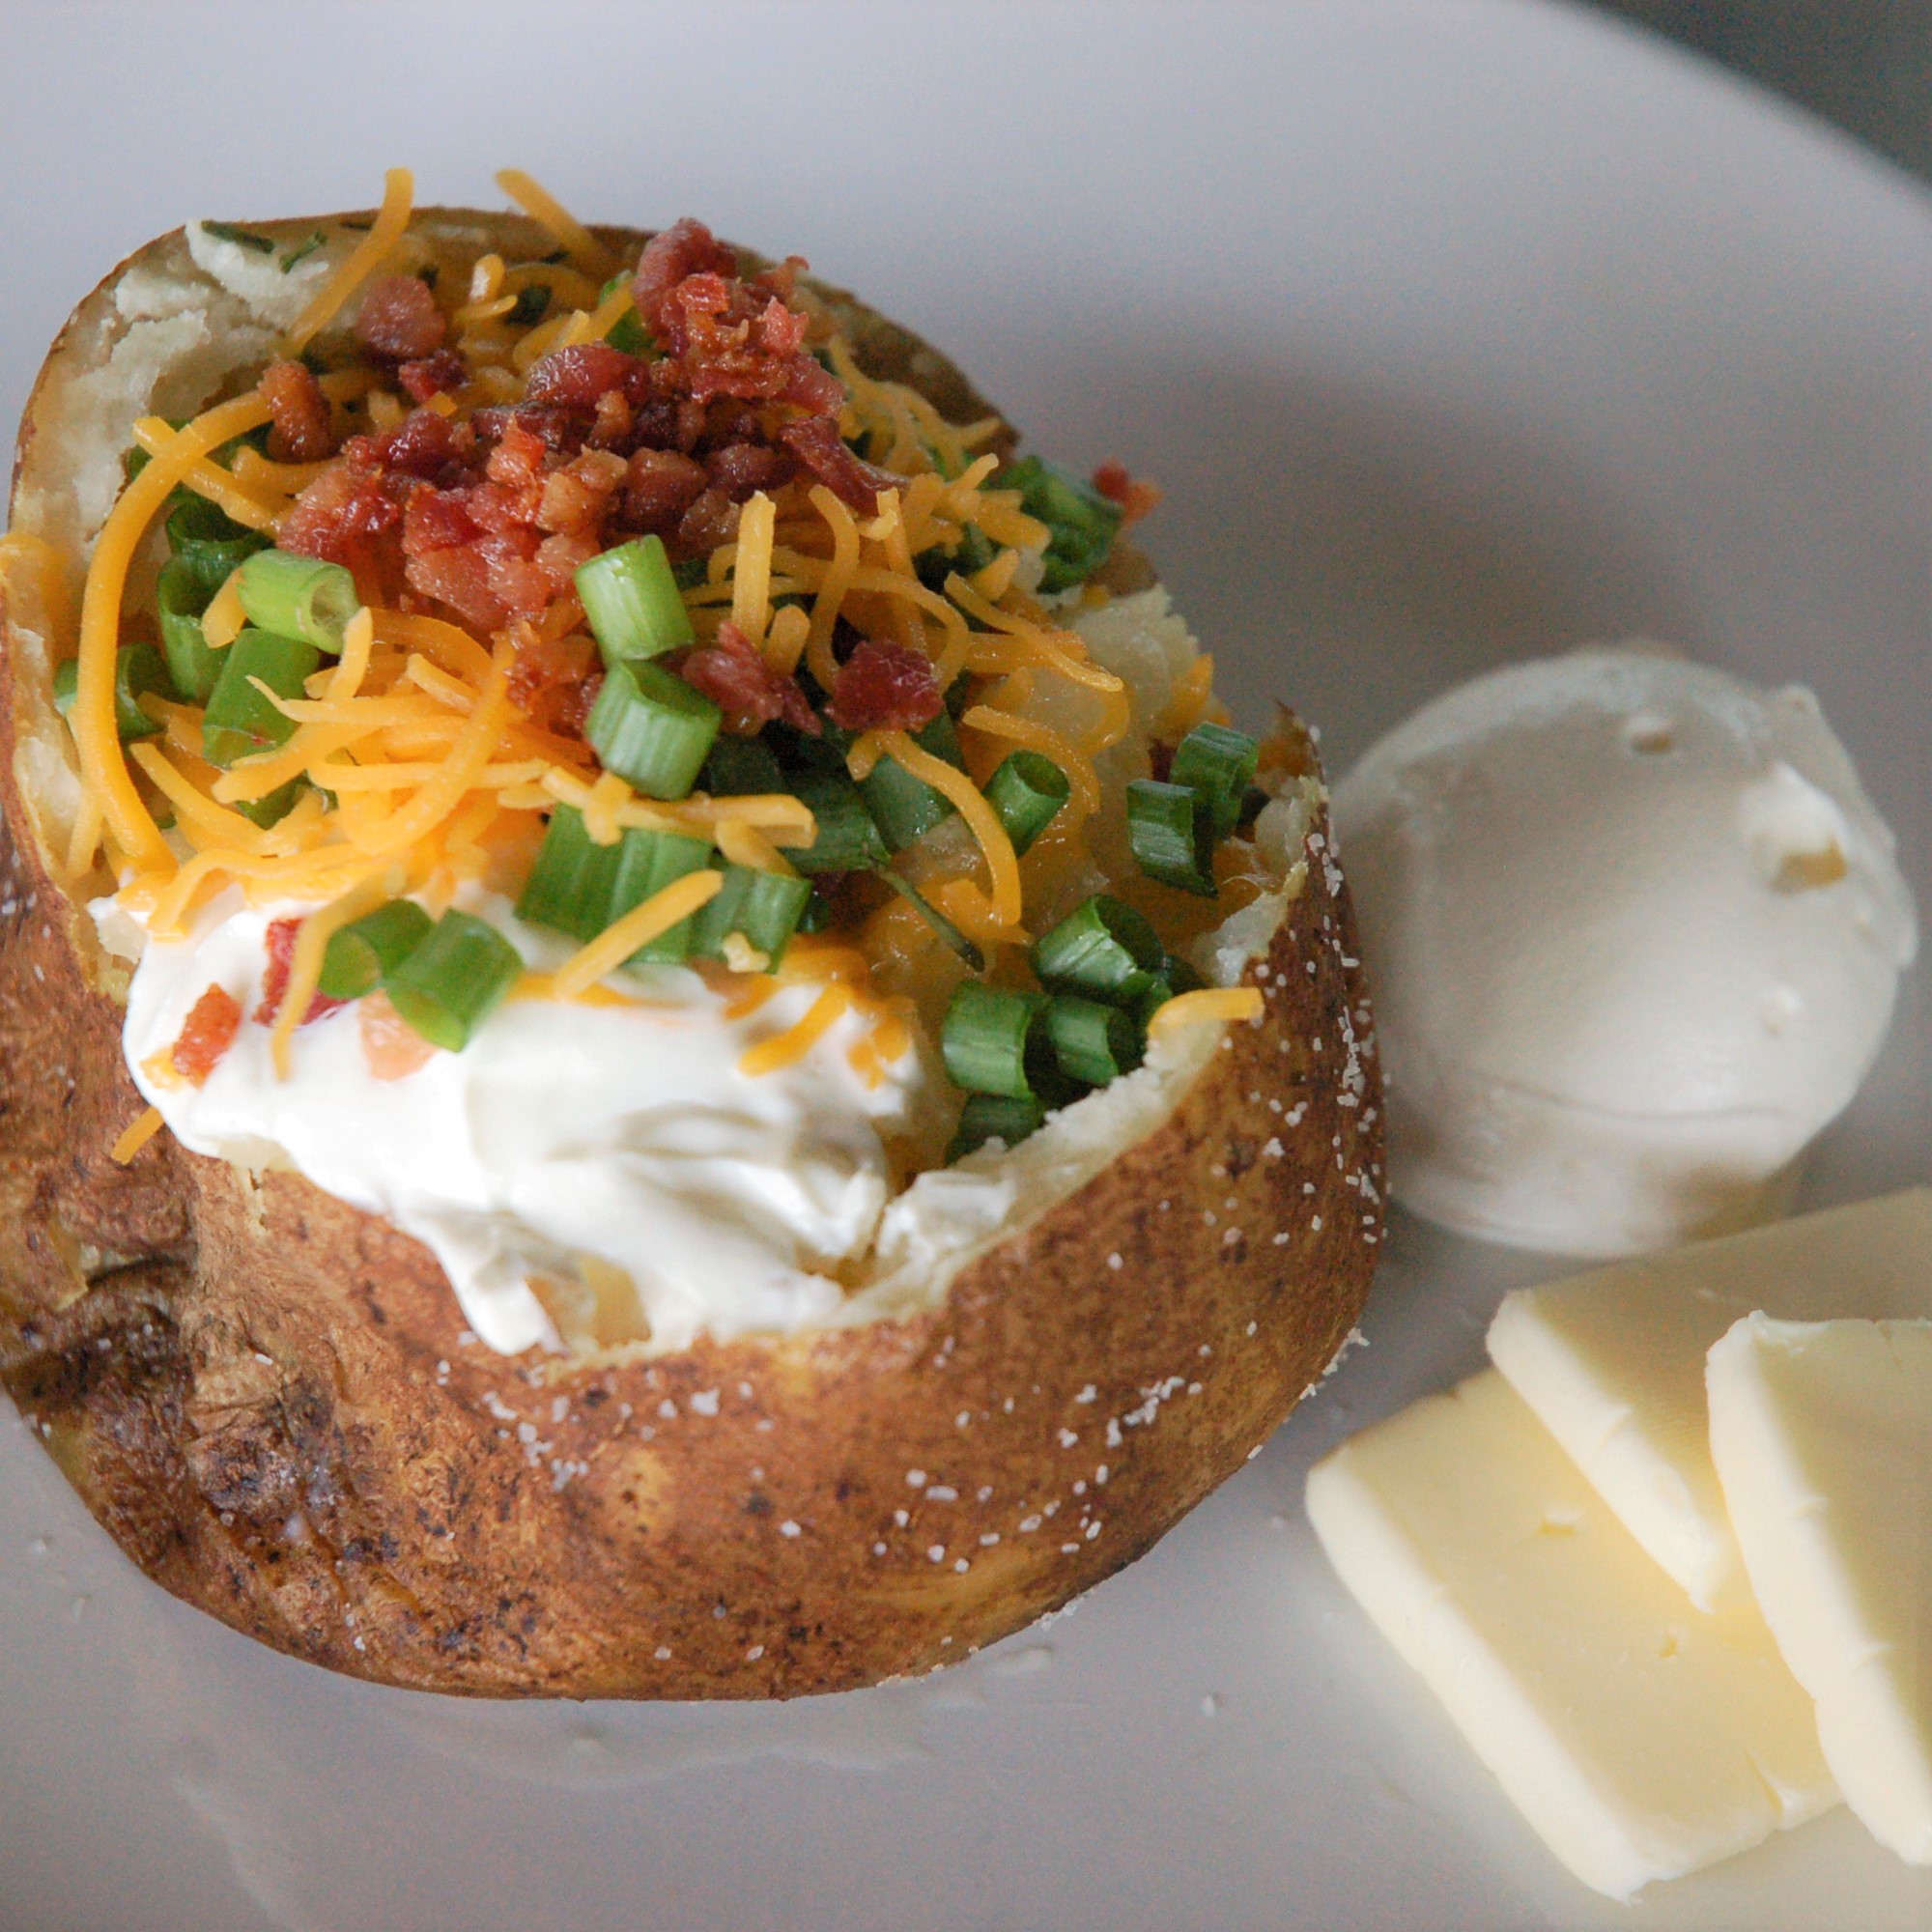 Loaded Baked Potato Bar - Plowing Through Life